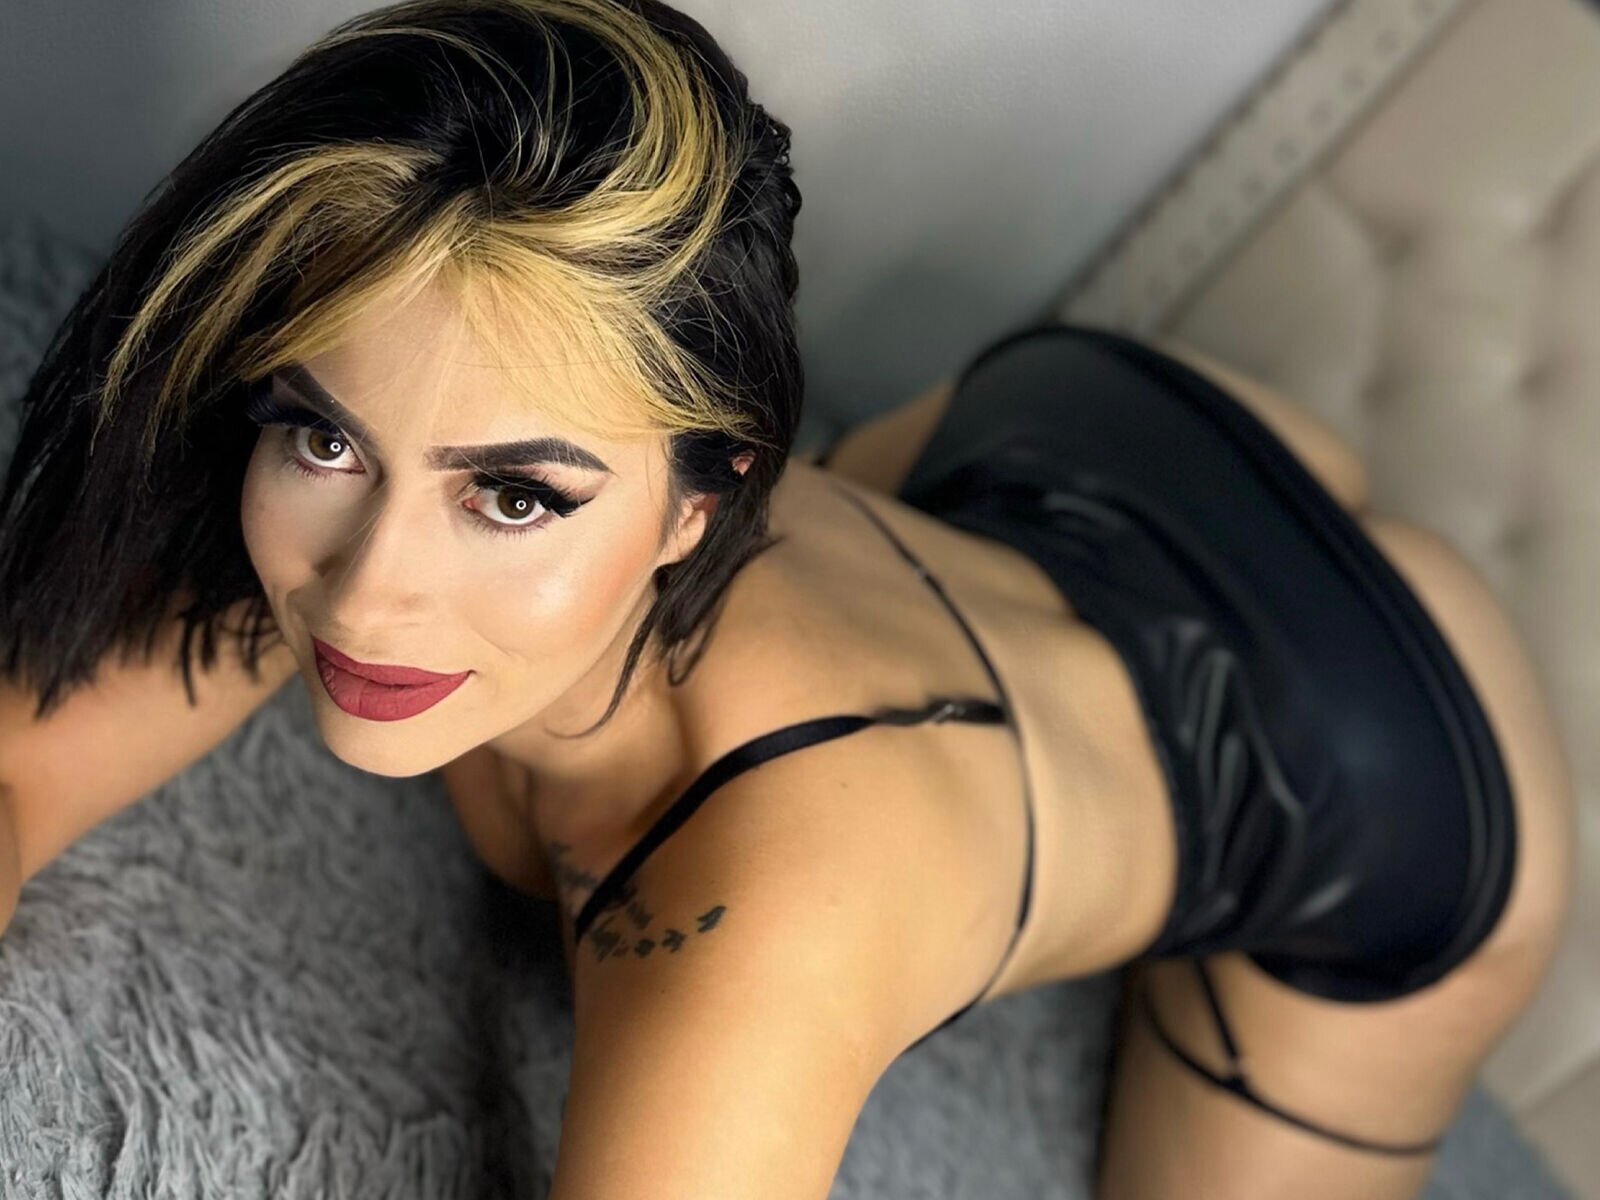 Free Live Sex Chat With VaioletMiller